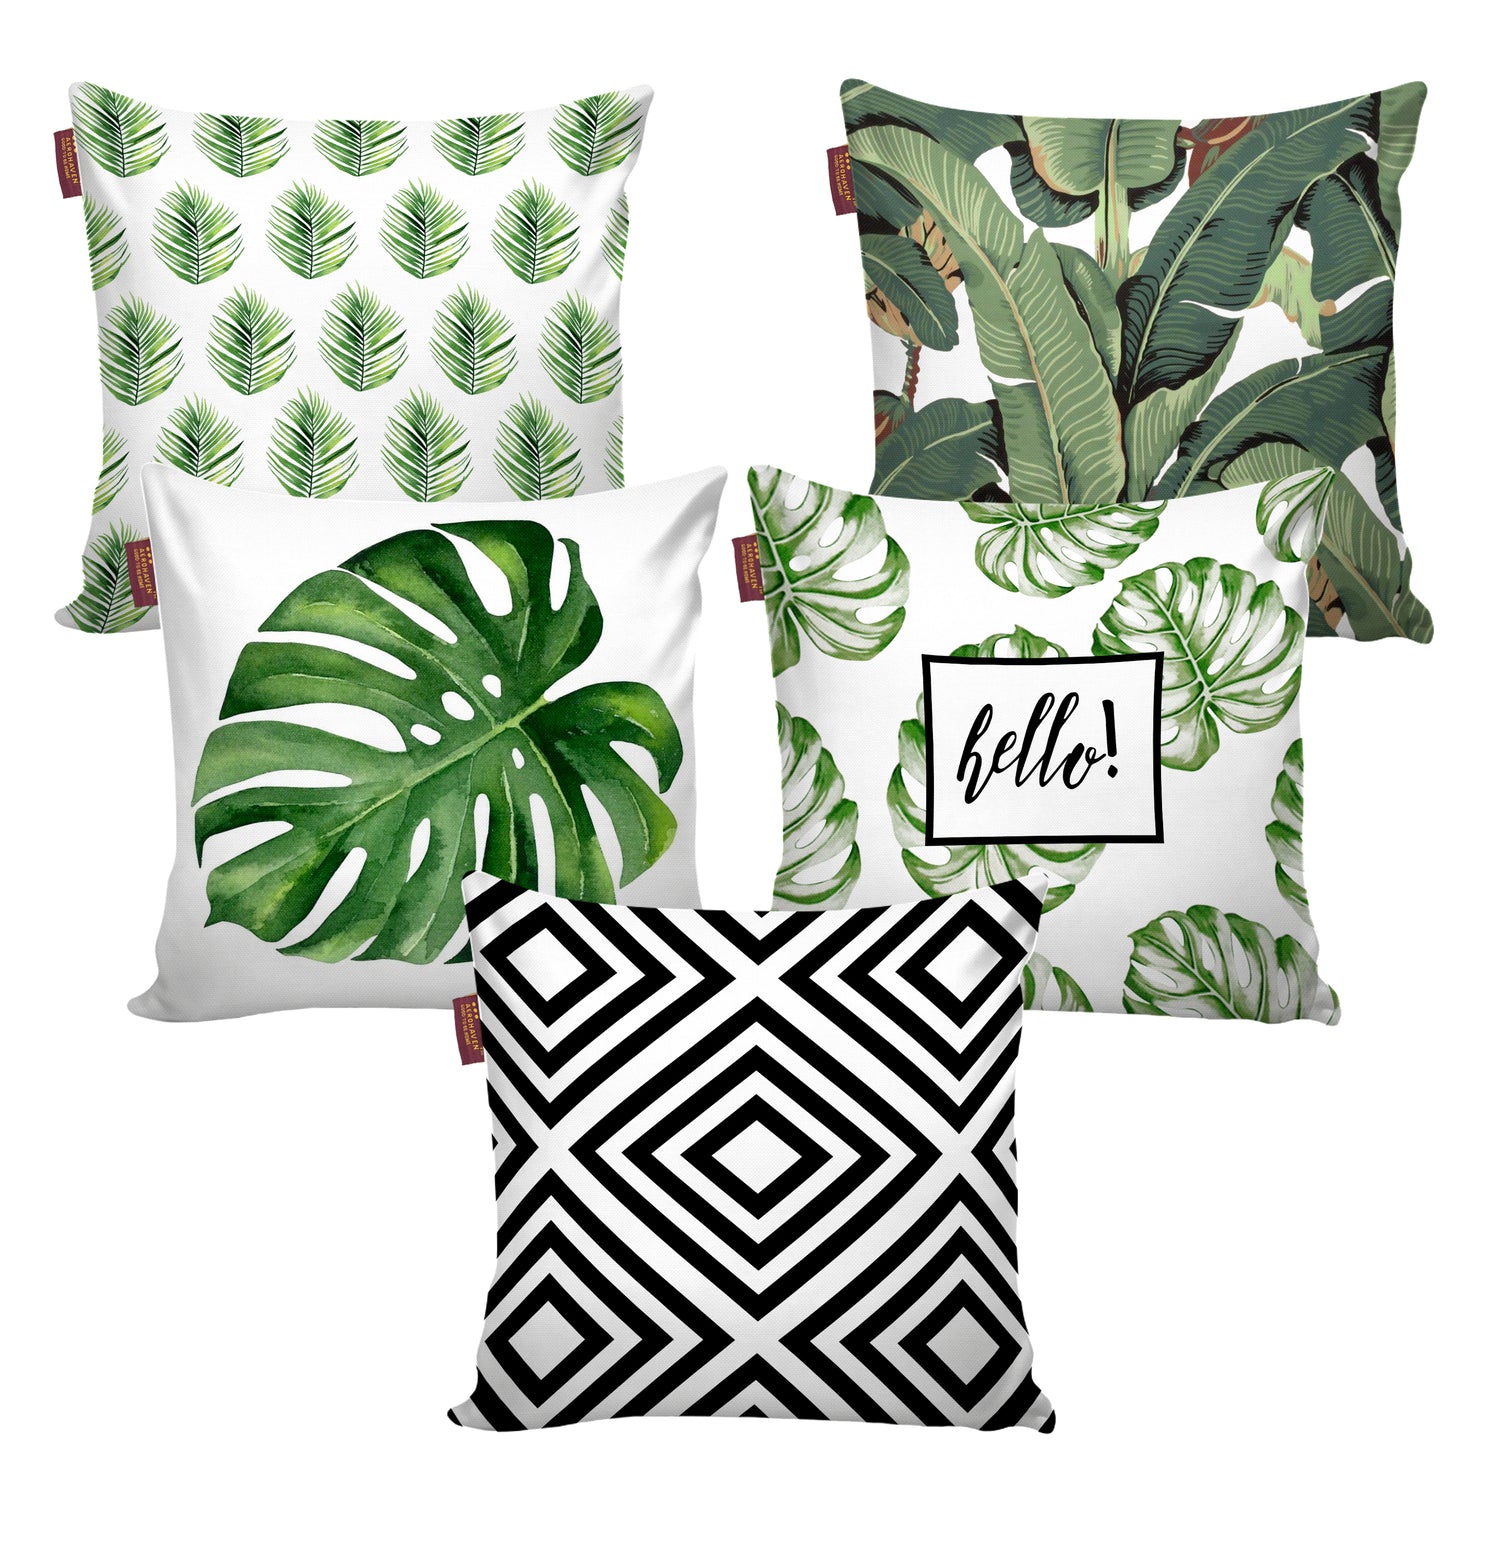 Set of 5 Nature Digital Printed Hand Stitched Throw Pillow/Cushion Covers